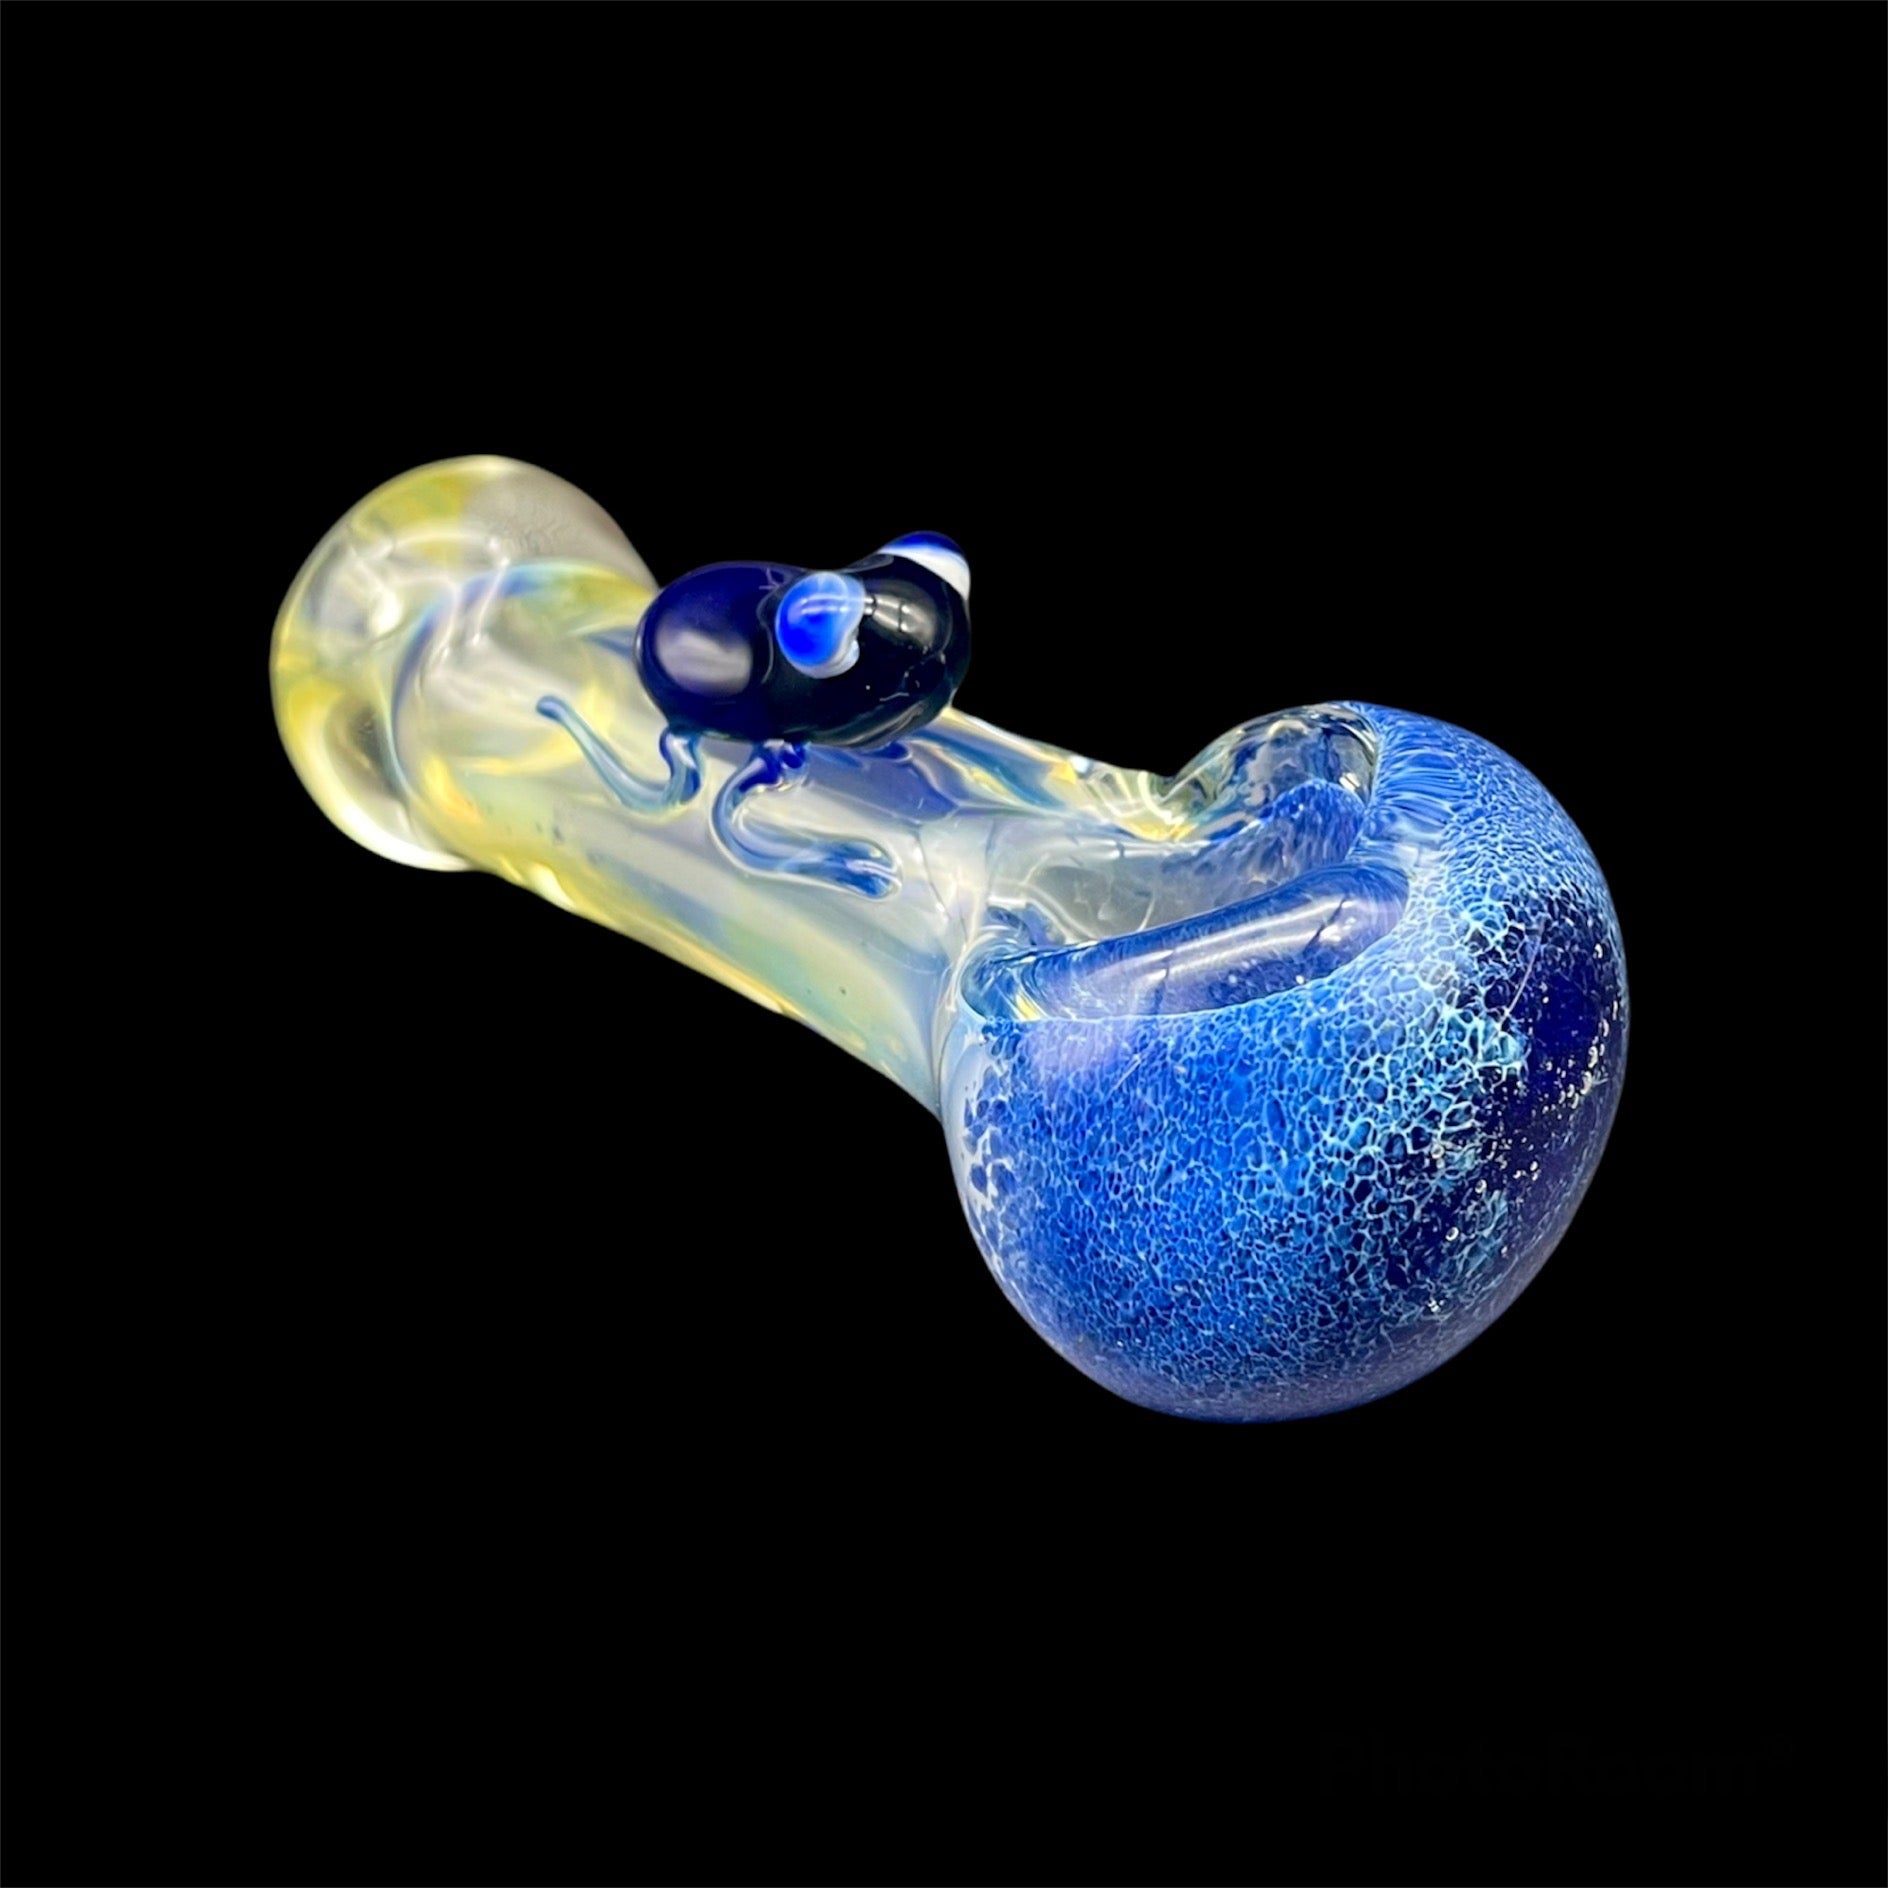 Unique Frog Glass Pipes